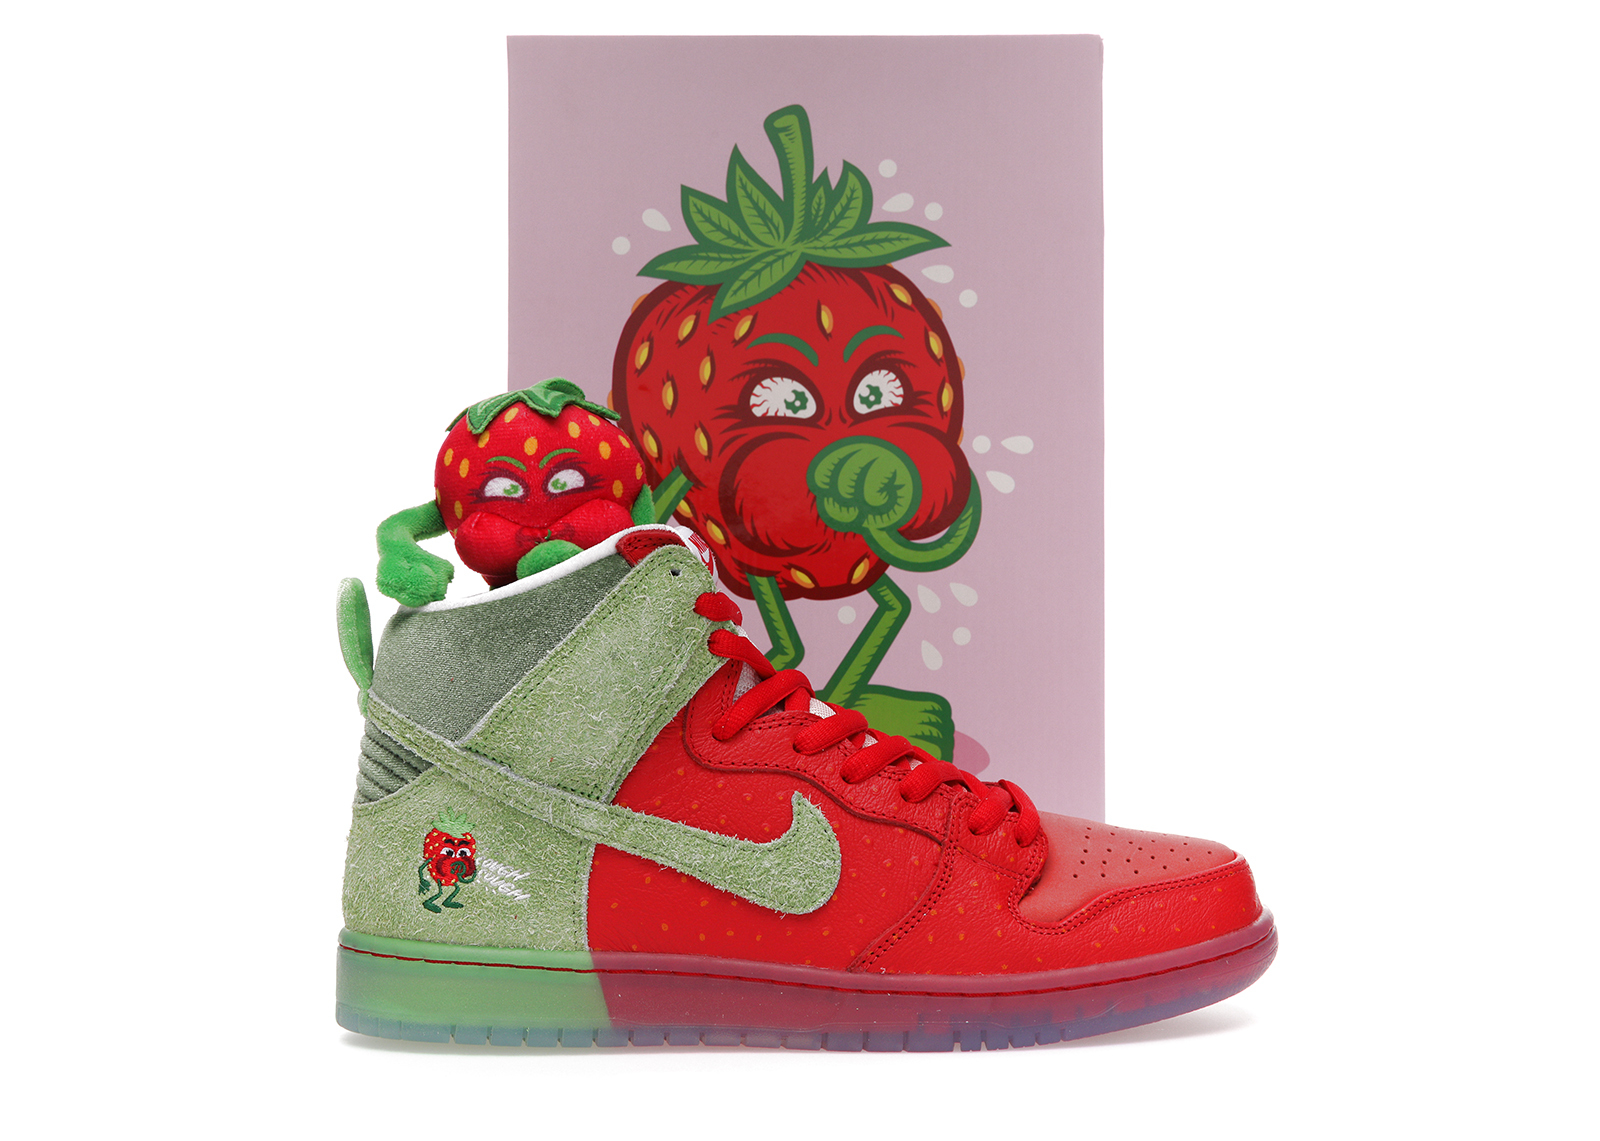 Nike SB Dunk High Strawberry Cough (Special Box)